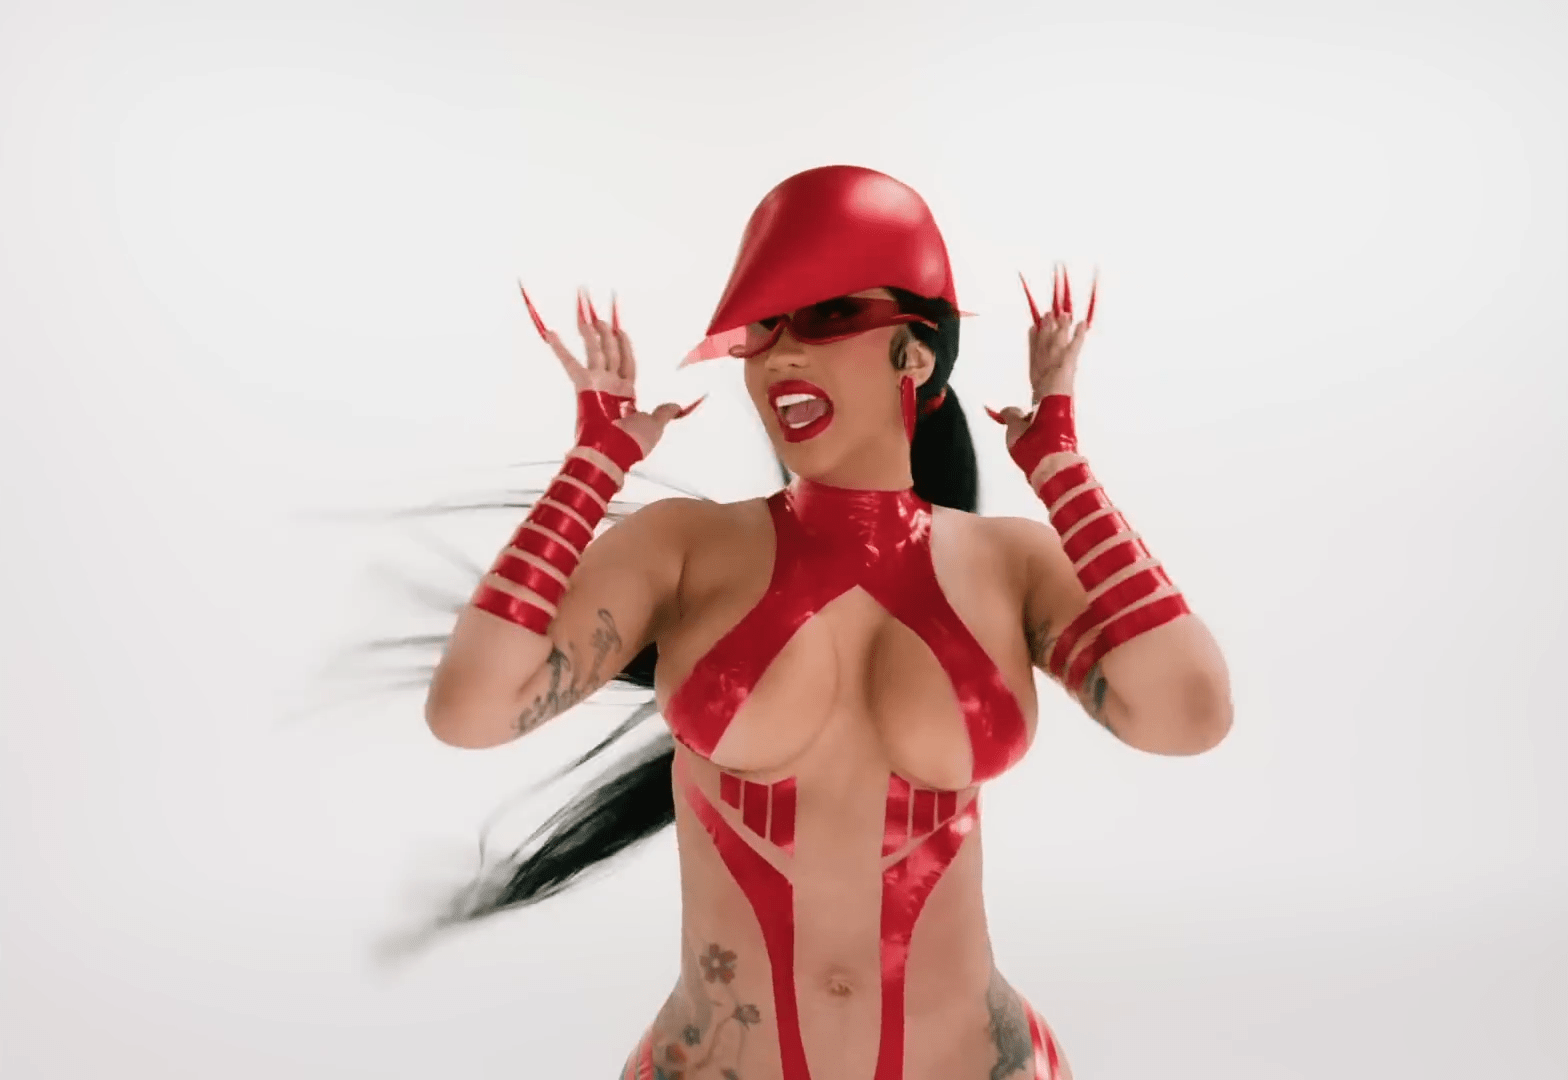 Cardi B Has Had “Enough” In New Video